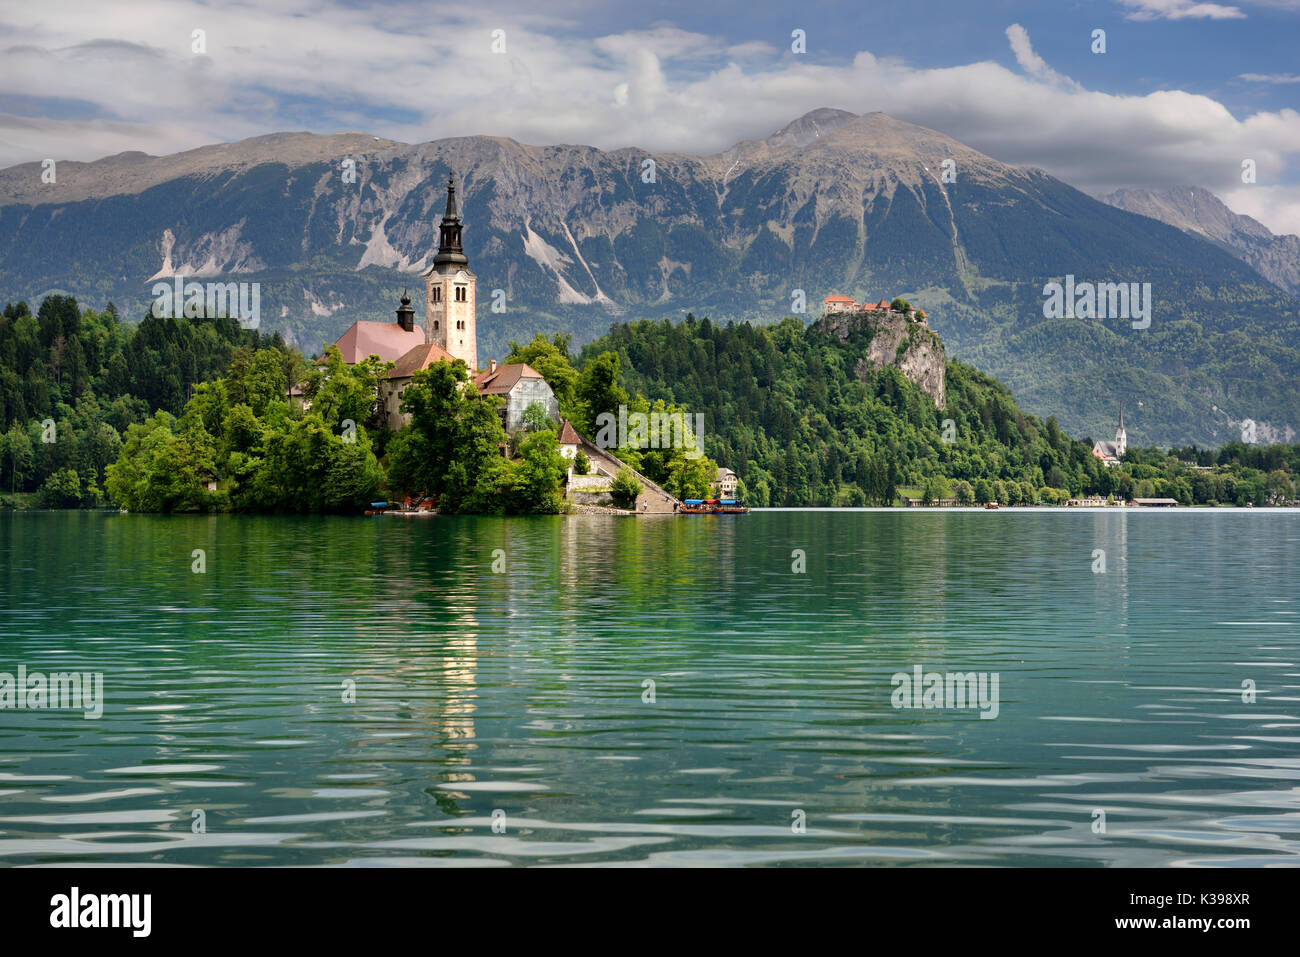 Assumption of Mary pilgrimage church Beld Island Lake Bled with Bled castle on cliff and St Martin church Sol massive of Karavanke mountains Slovenia Stock Photo